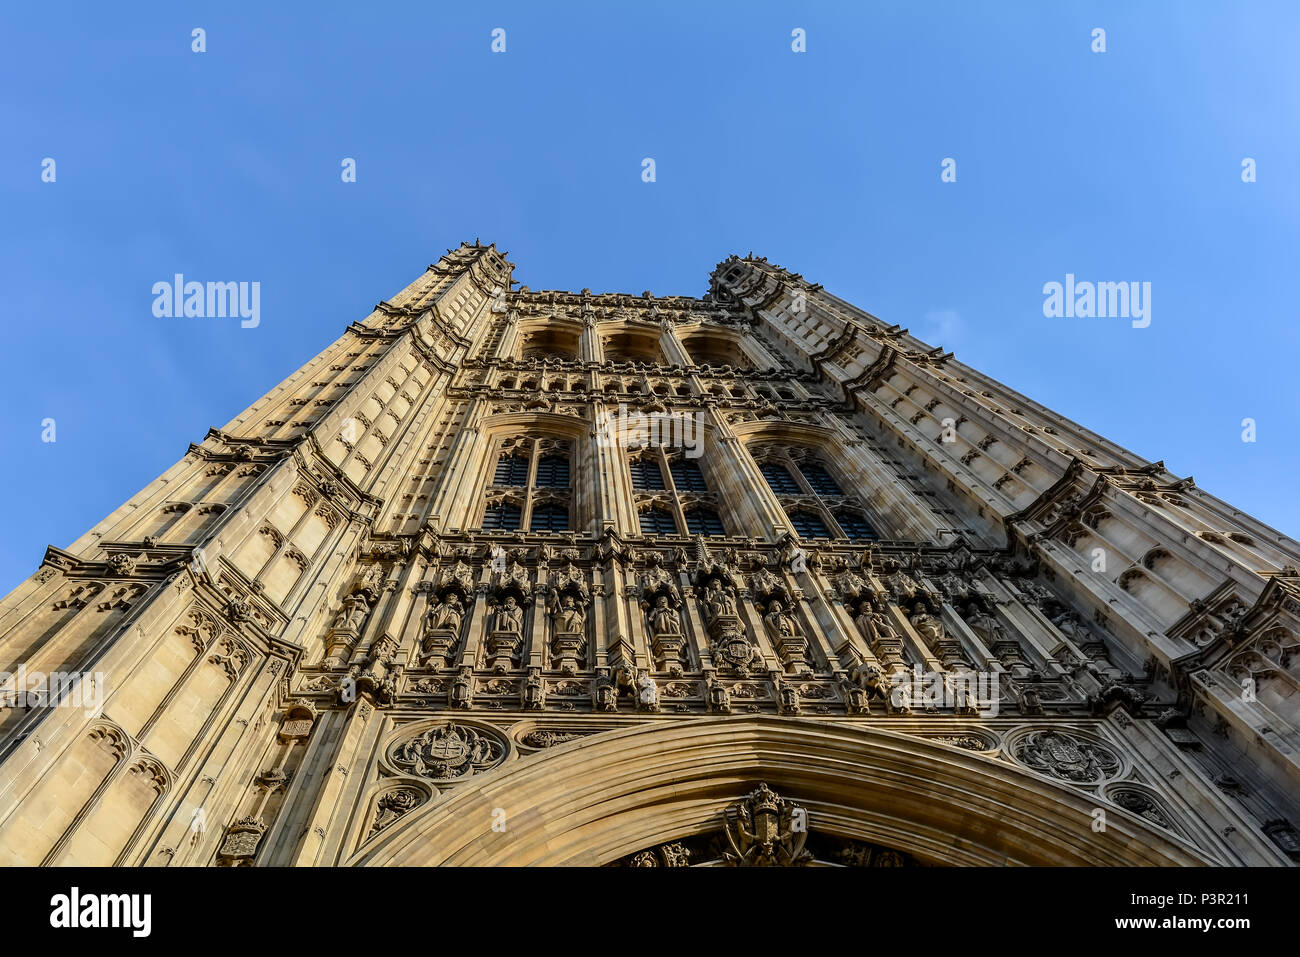 A view of the neo-Gothic Victoria Tower of the Palace of Westminster from low angle against the blue sky Stock Photo